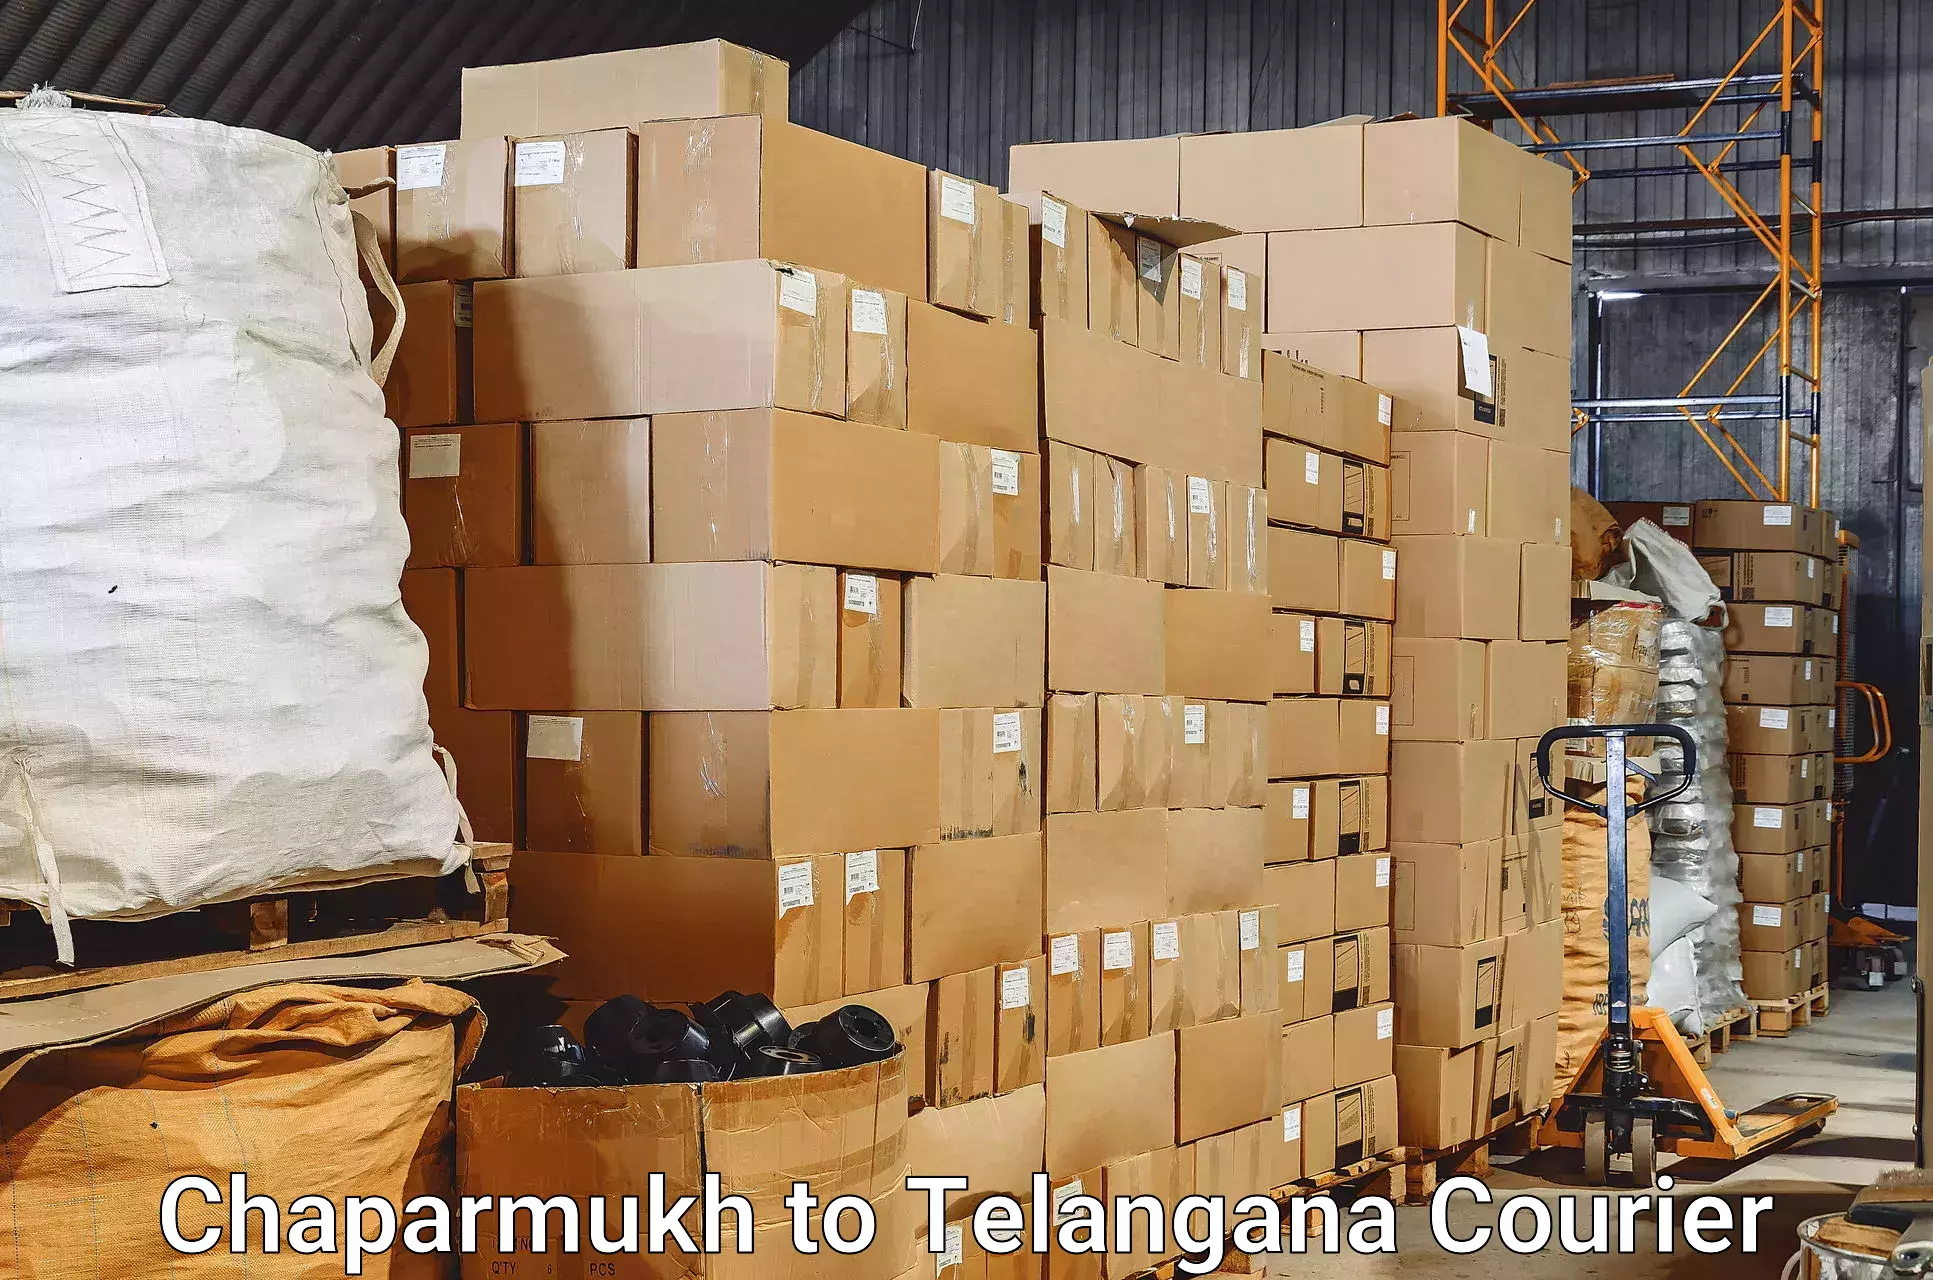 Luggage transport service in Chaparmukh to Kaghaznagar